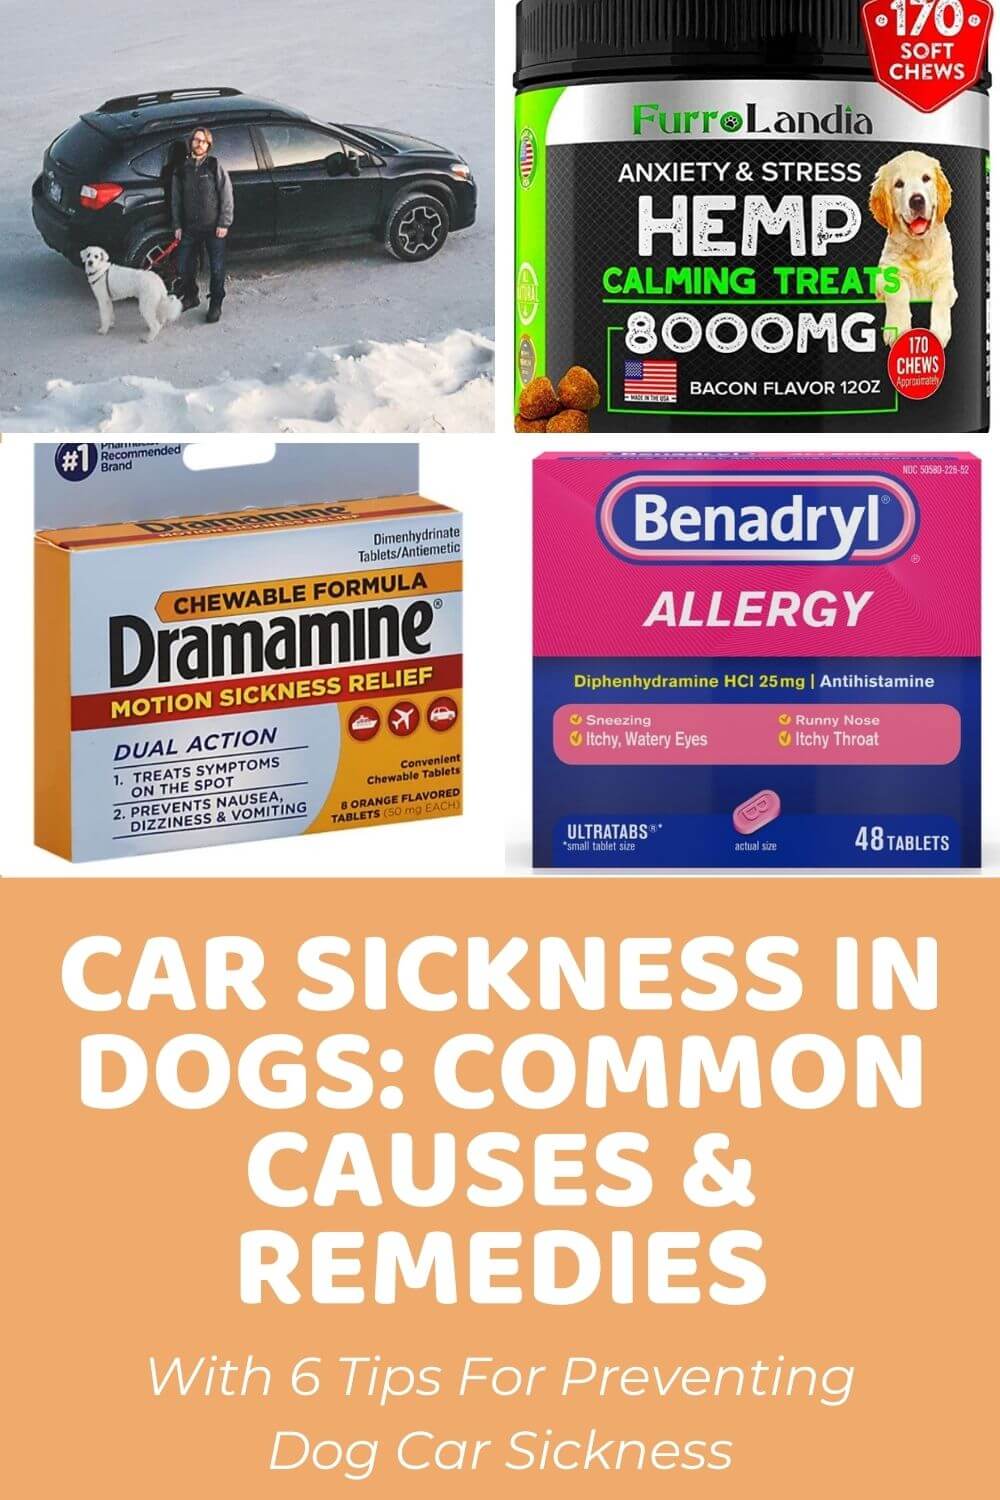 Dog Car Sickness_ Common Causes and Remedies